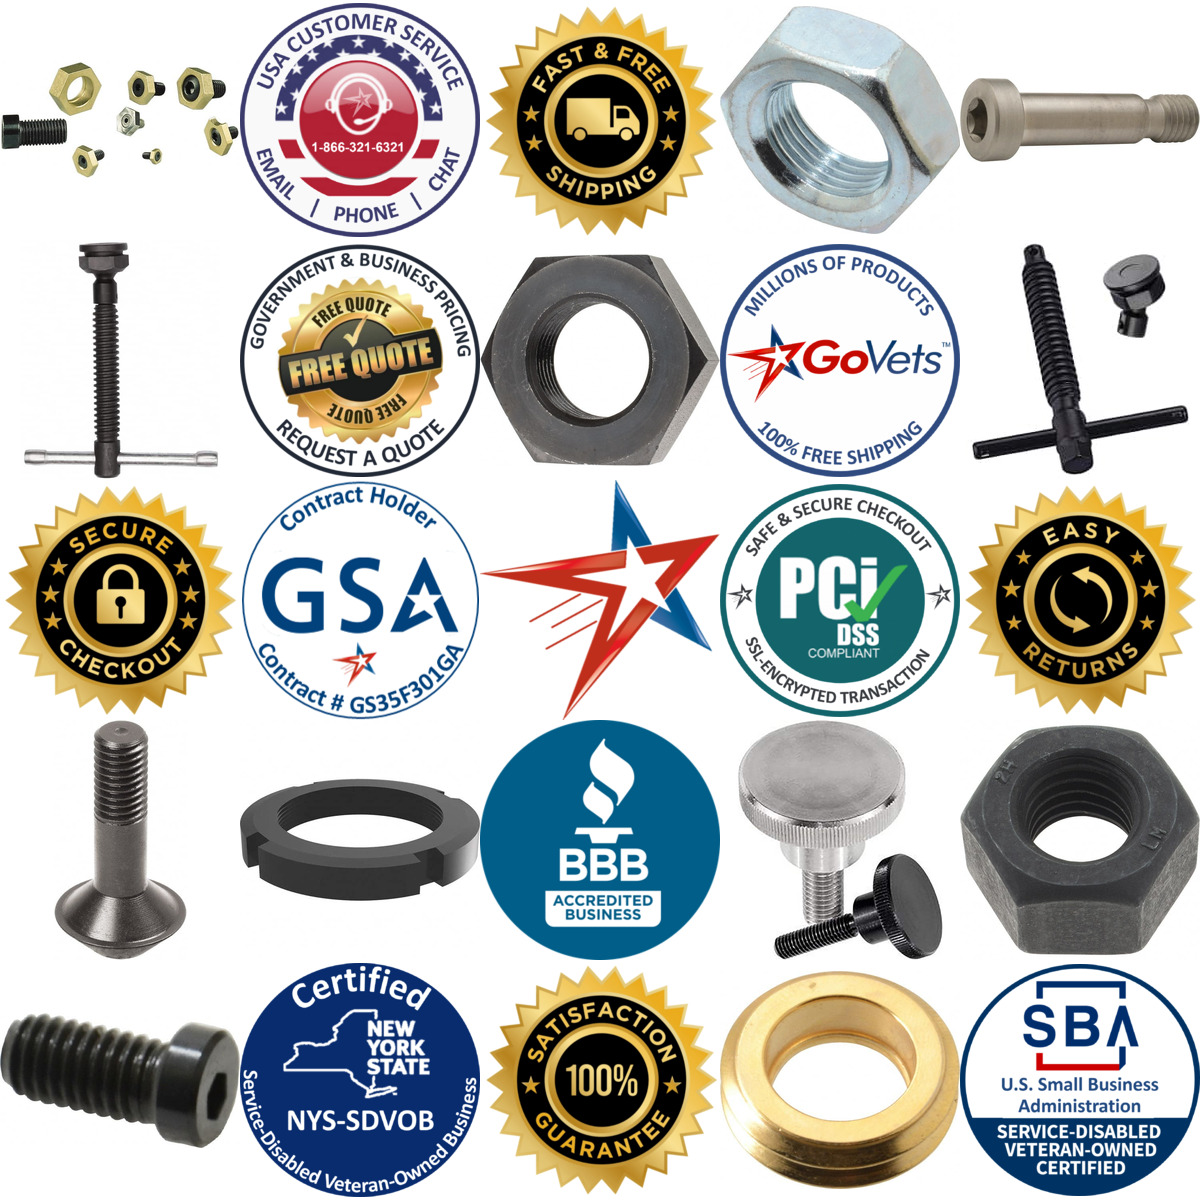 A selection of Clamp Hardware products on GoVets